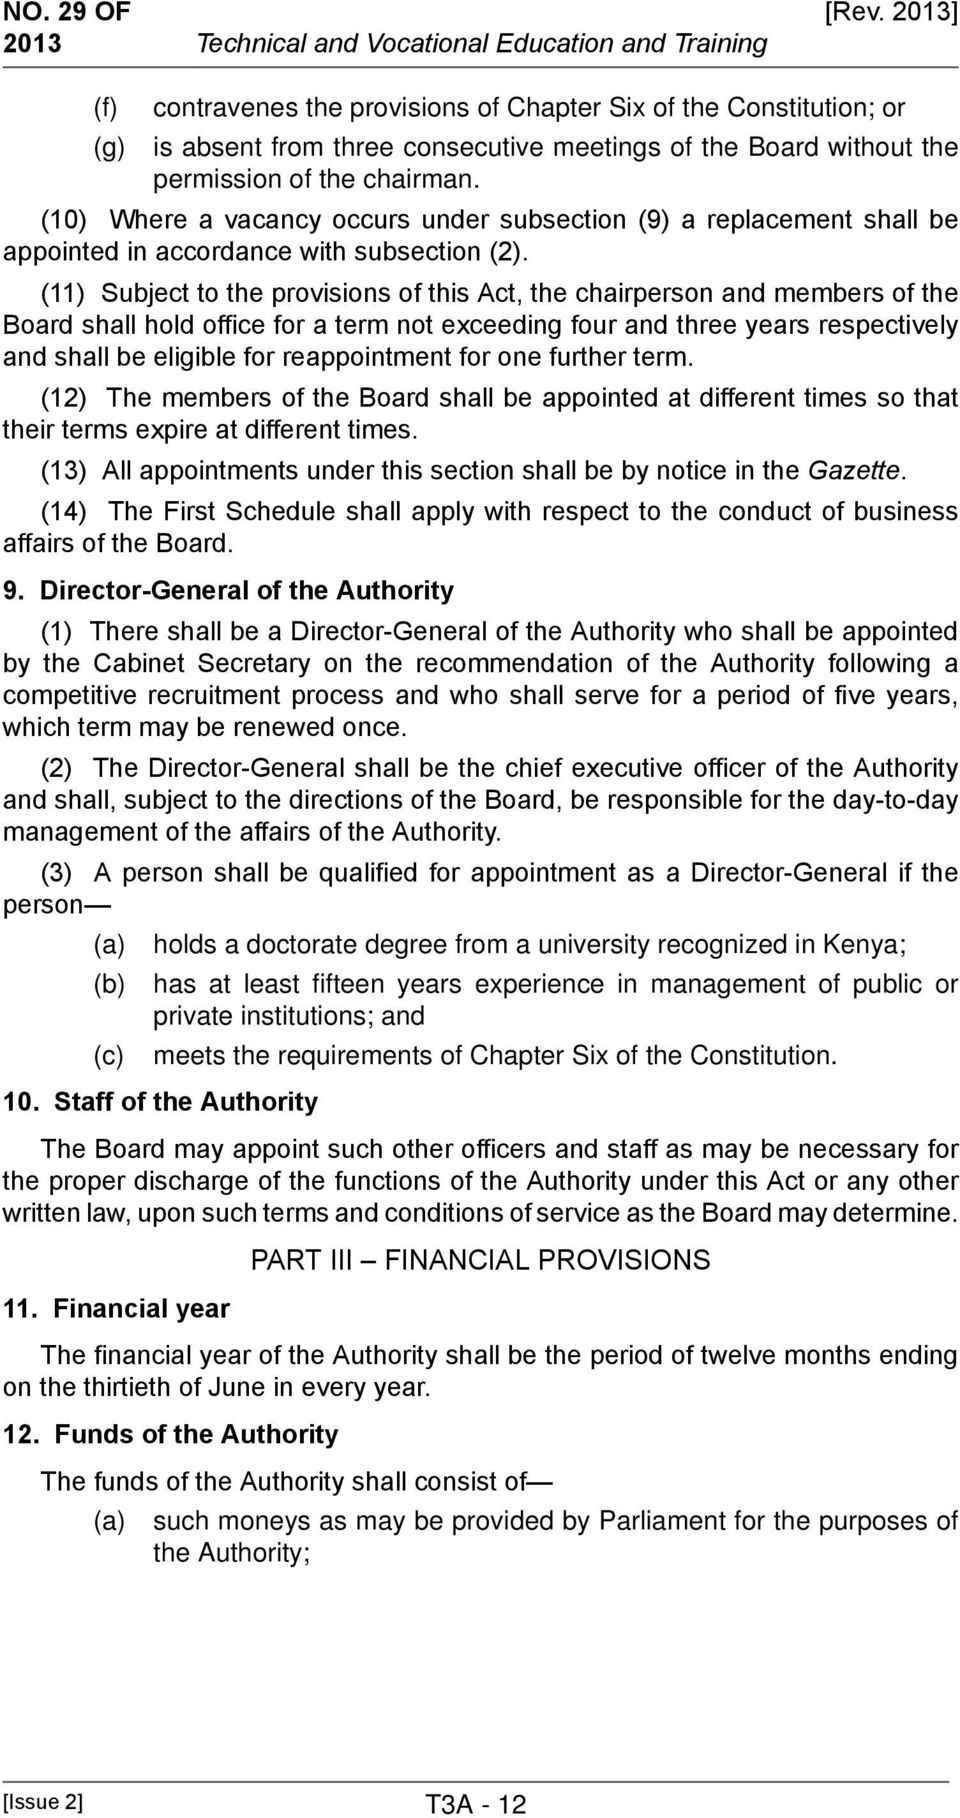 (10) Where a vacancy occurs under subsection (9) a replacement shall be appointed in accordance with subsection (2).